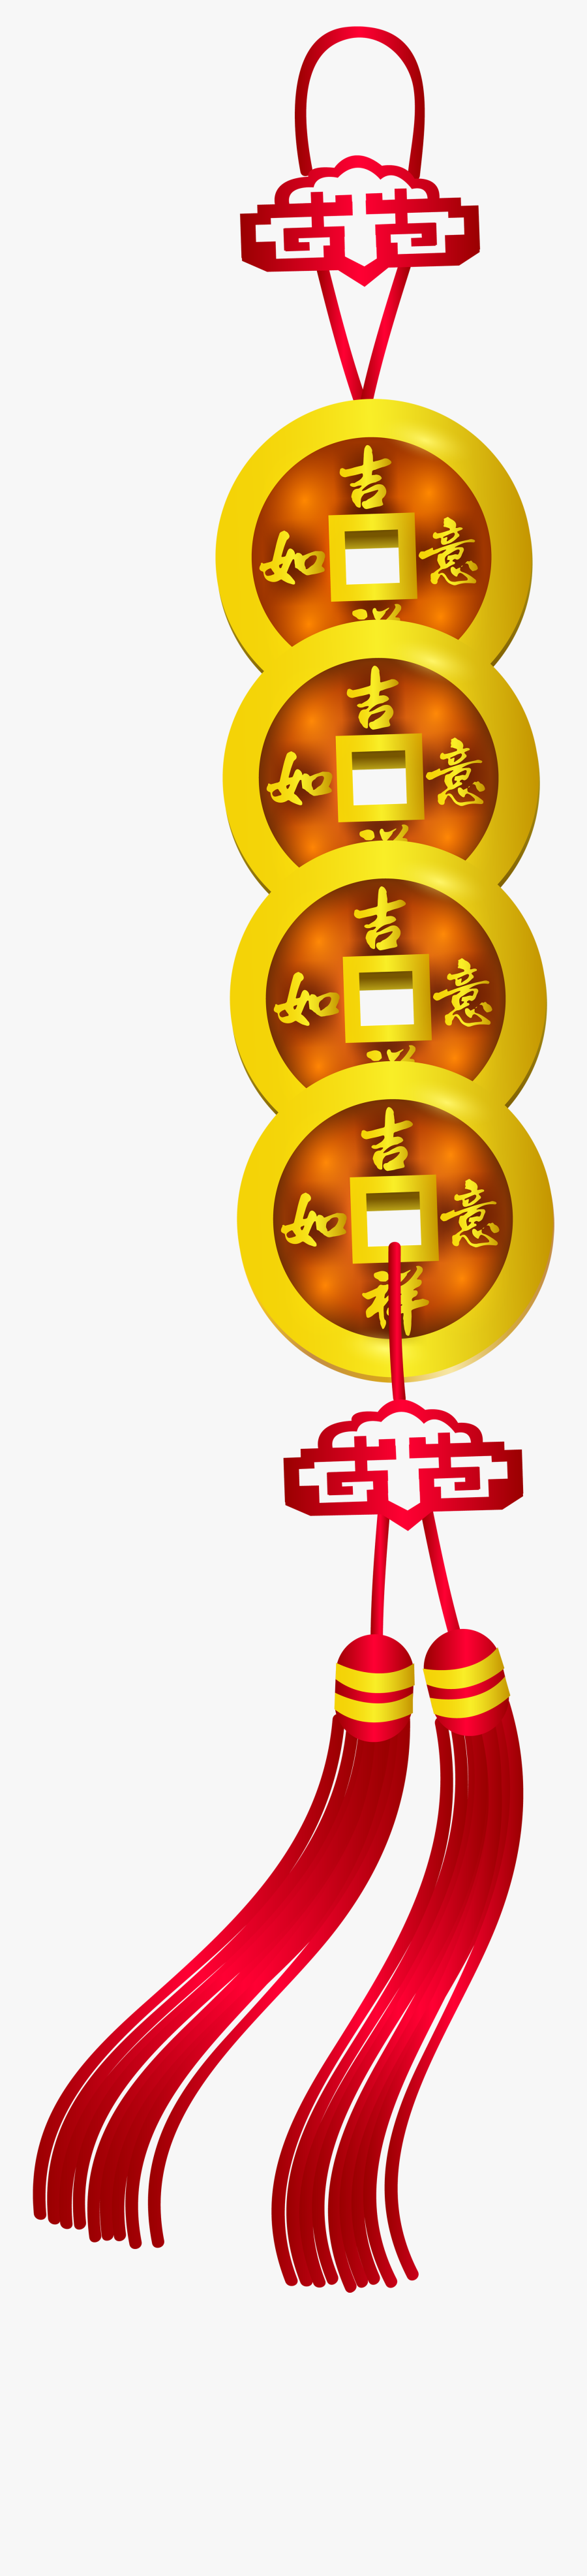 Chinese New Year Decoration Png Clip Art - New Year Chinese Png, Transparent Clipart